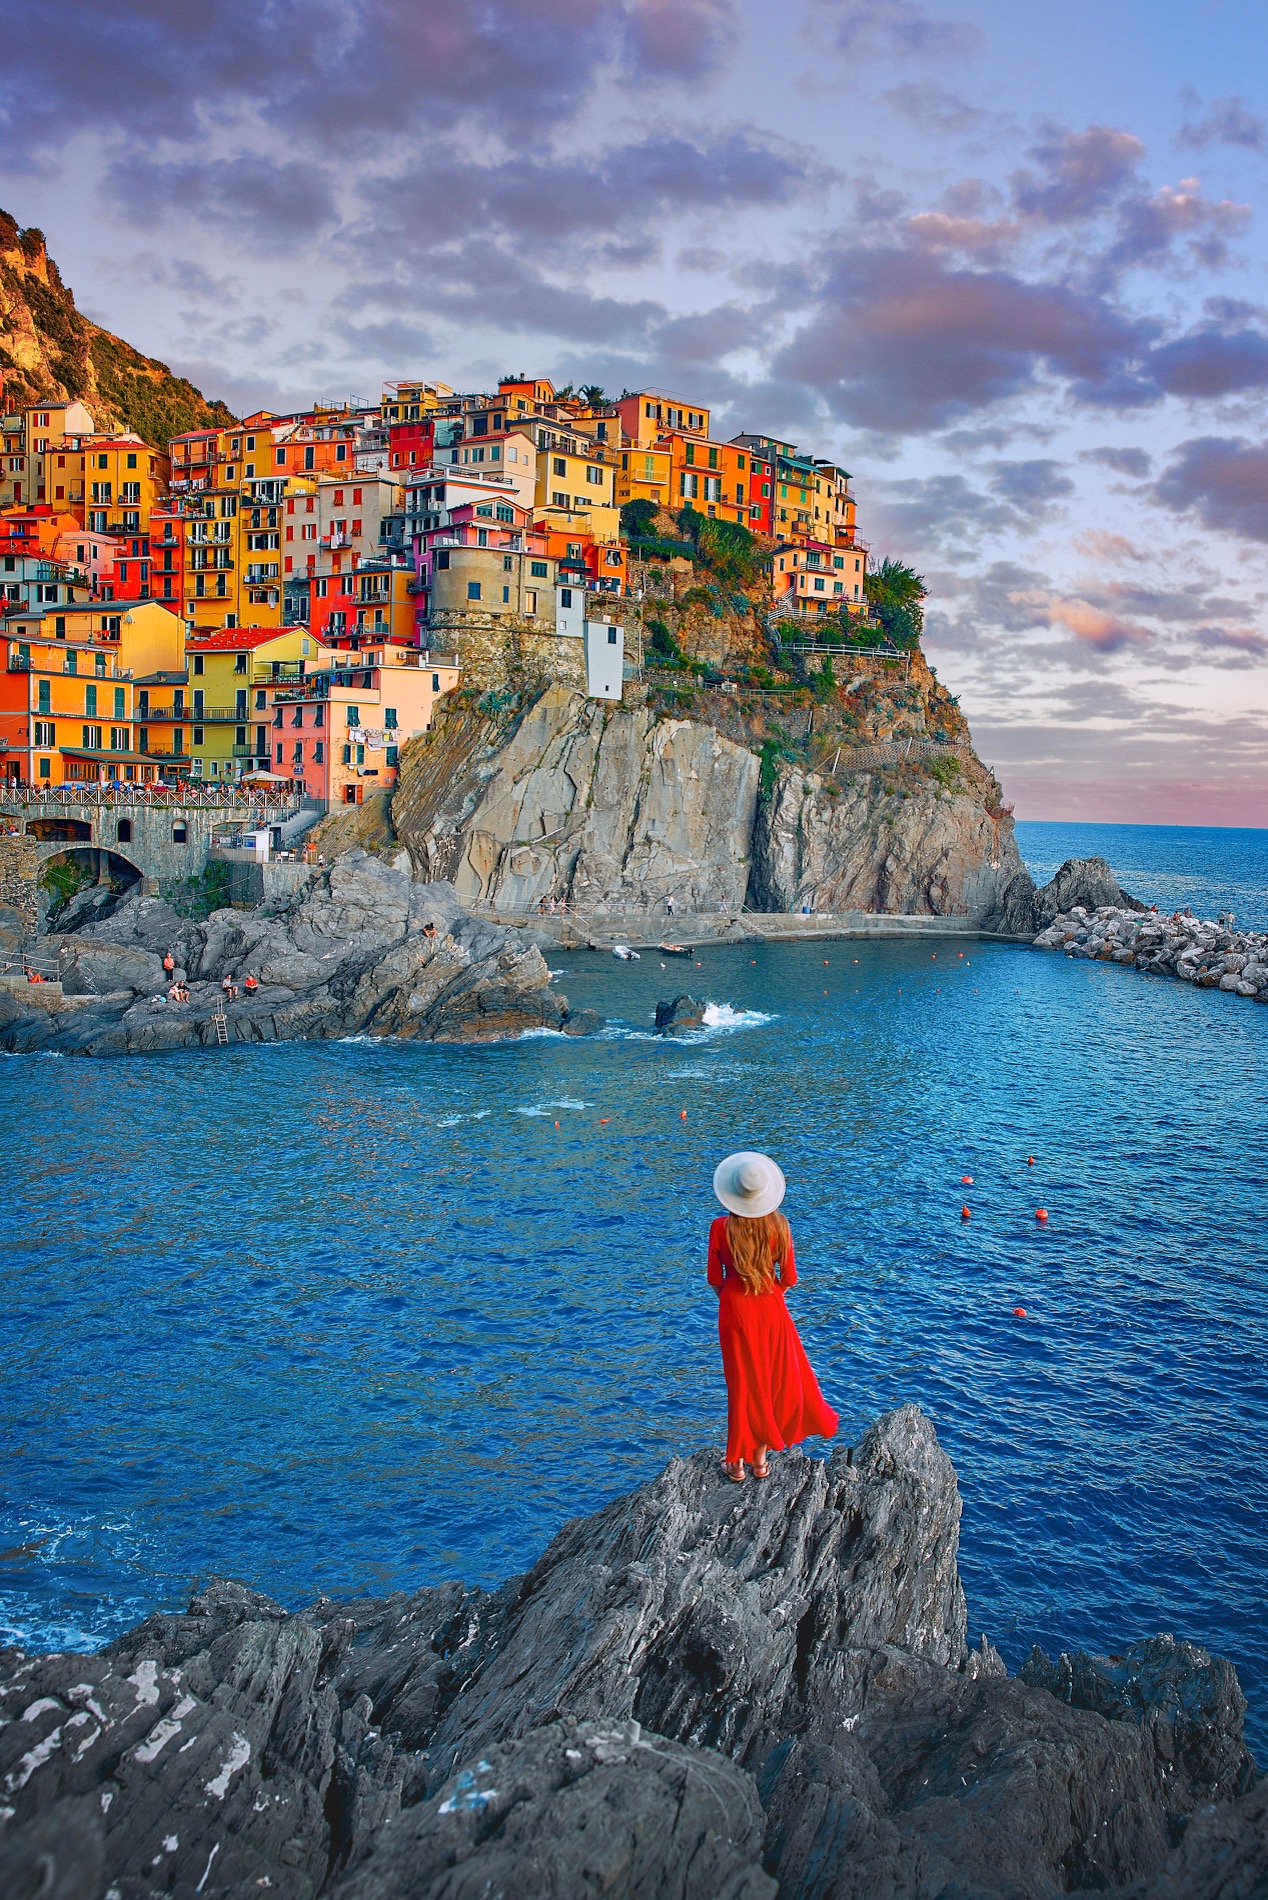 Woman in a flowing red dress and sun hat stands on a rock overlooking the water and colorful buildings of Manarola at sunset.